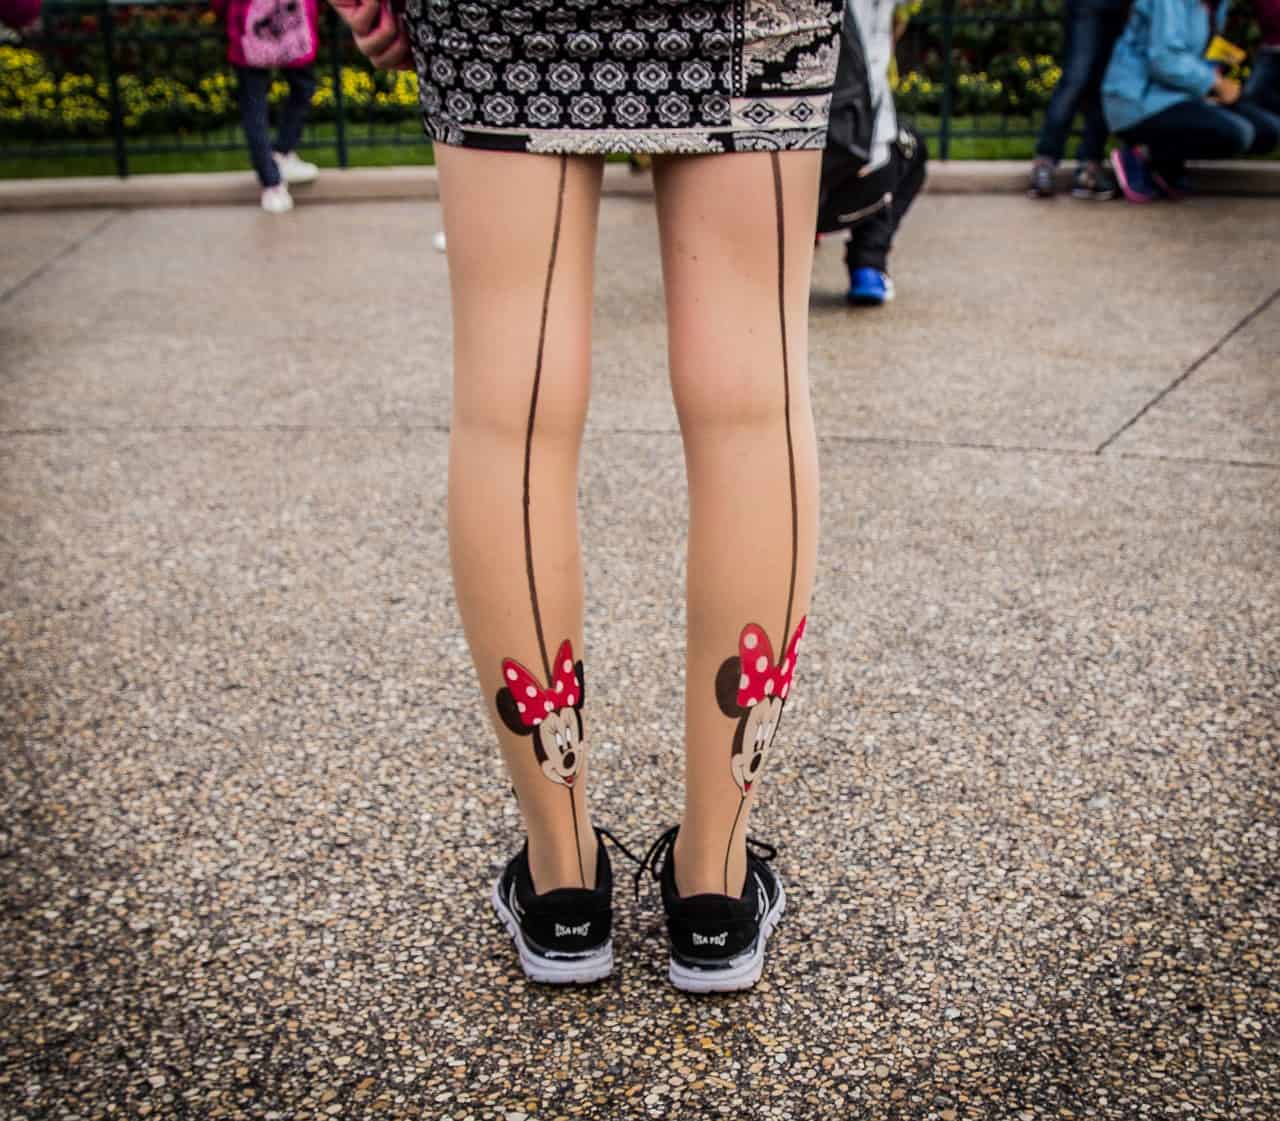 MUST READ-Best Shoes For Disney For 